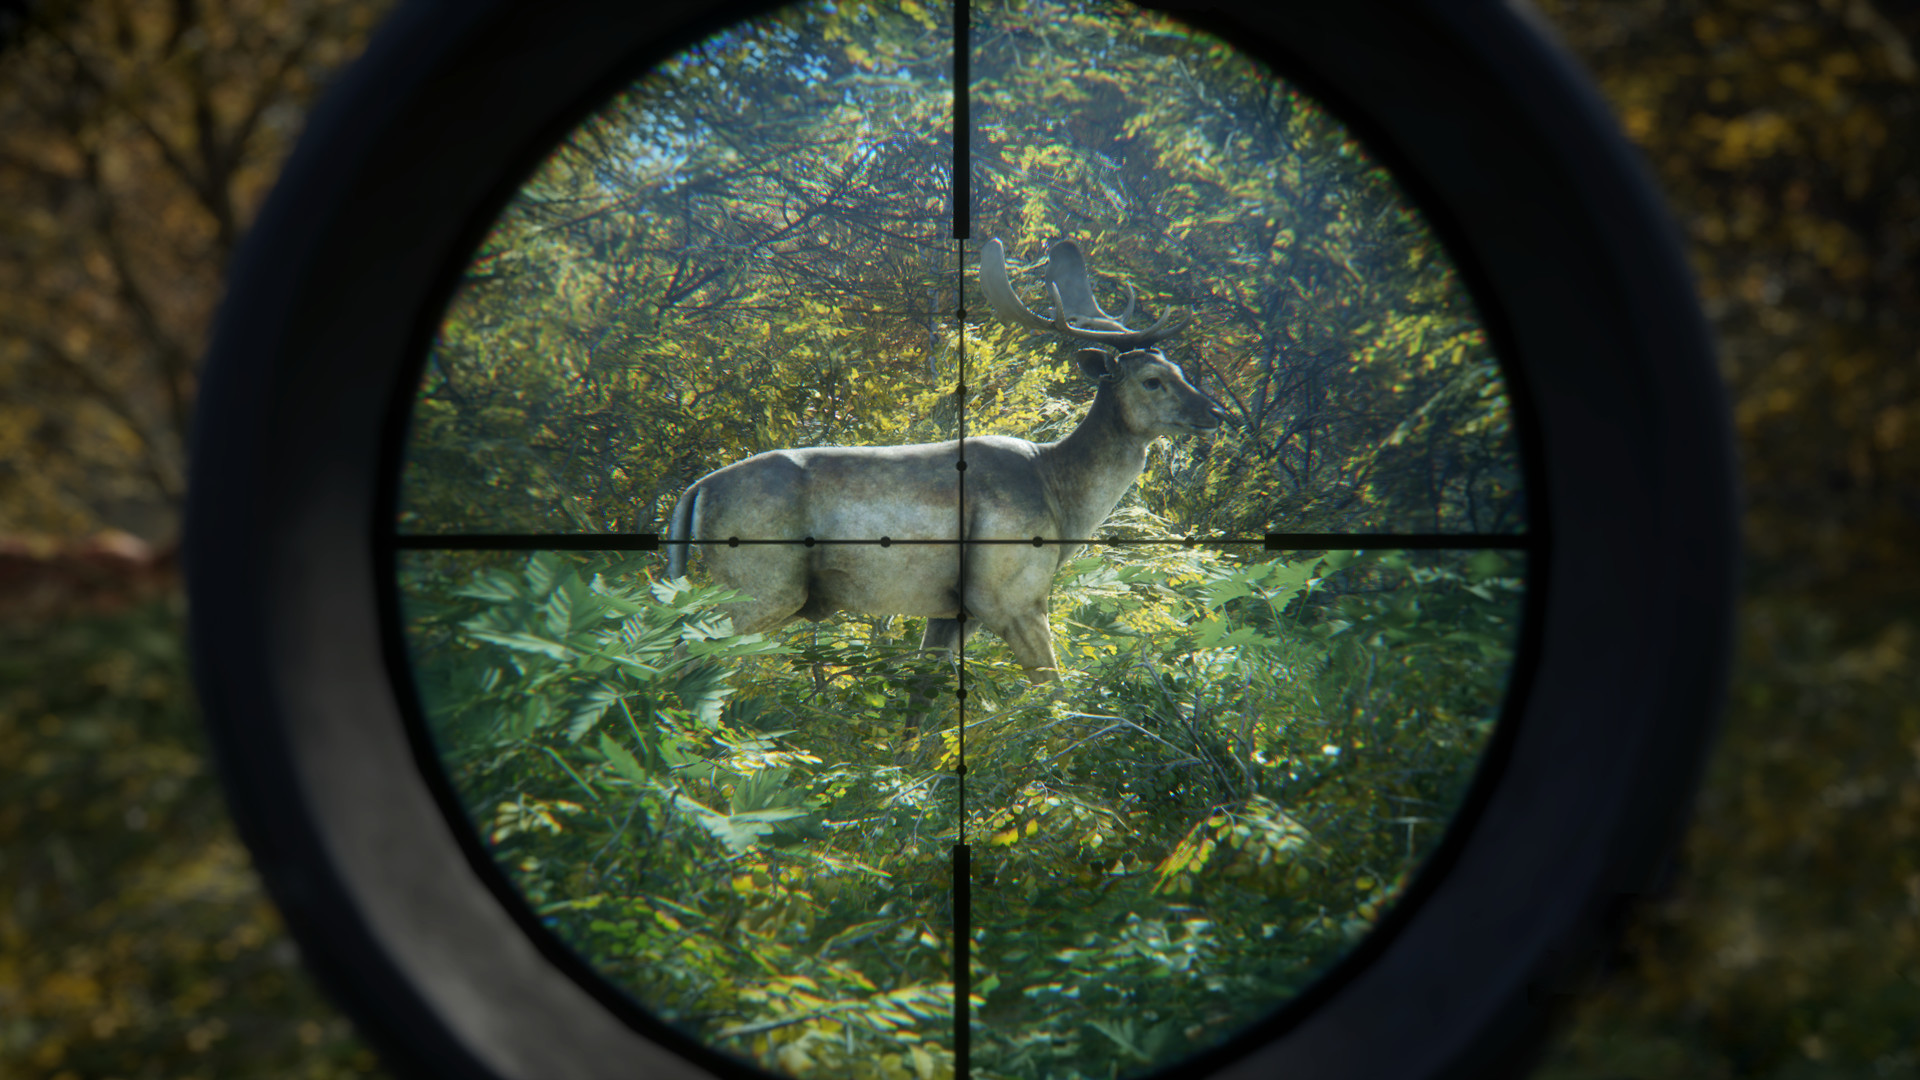 TheHunter: Call Of The Wild 2023 Complete Collection Steam Account